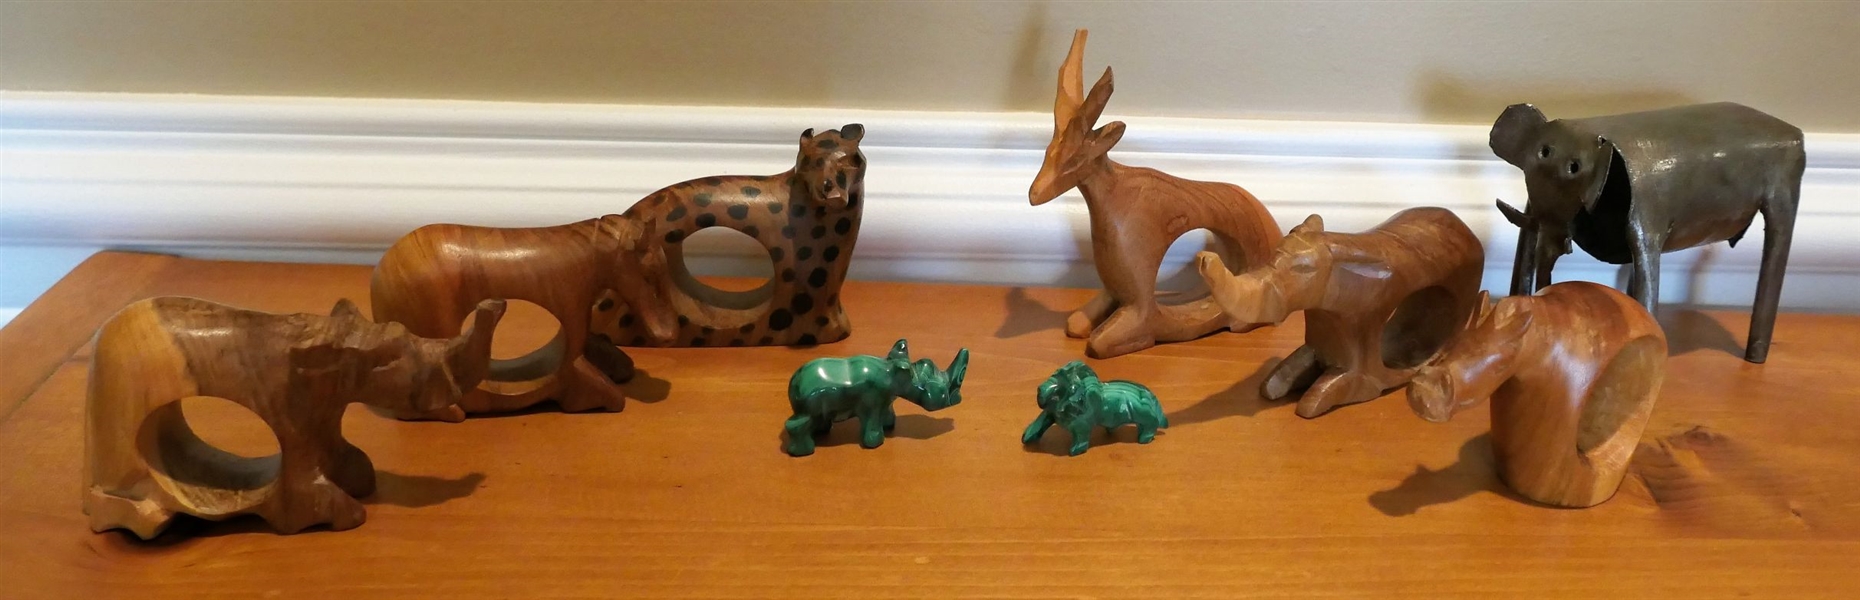  Lot of 10 Wood Carved Animal Napkin Rings, Metal Elephant Figure, and 2 Carved Malachite Stone Animals - Malachite Rhino Measures 1" tall 2" Long